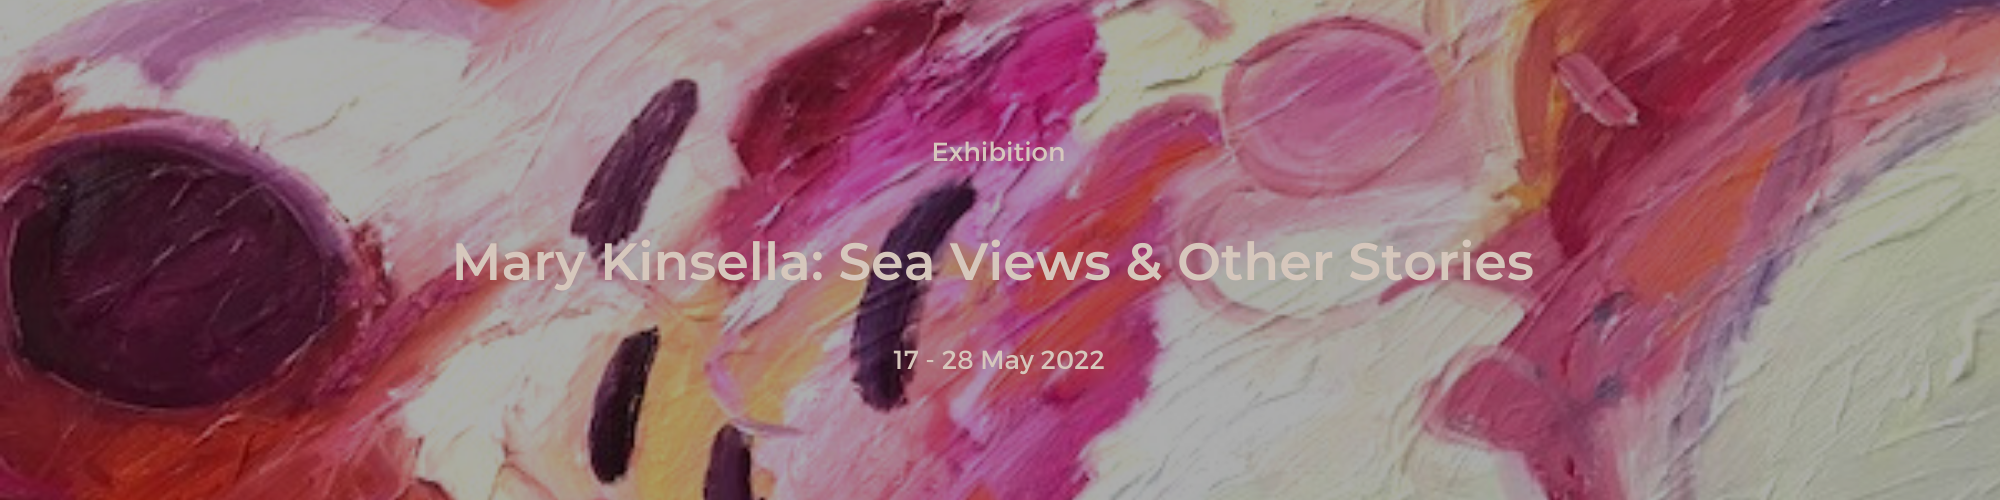 Mary Kinsella: Sea Views & Other Stories